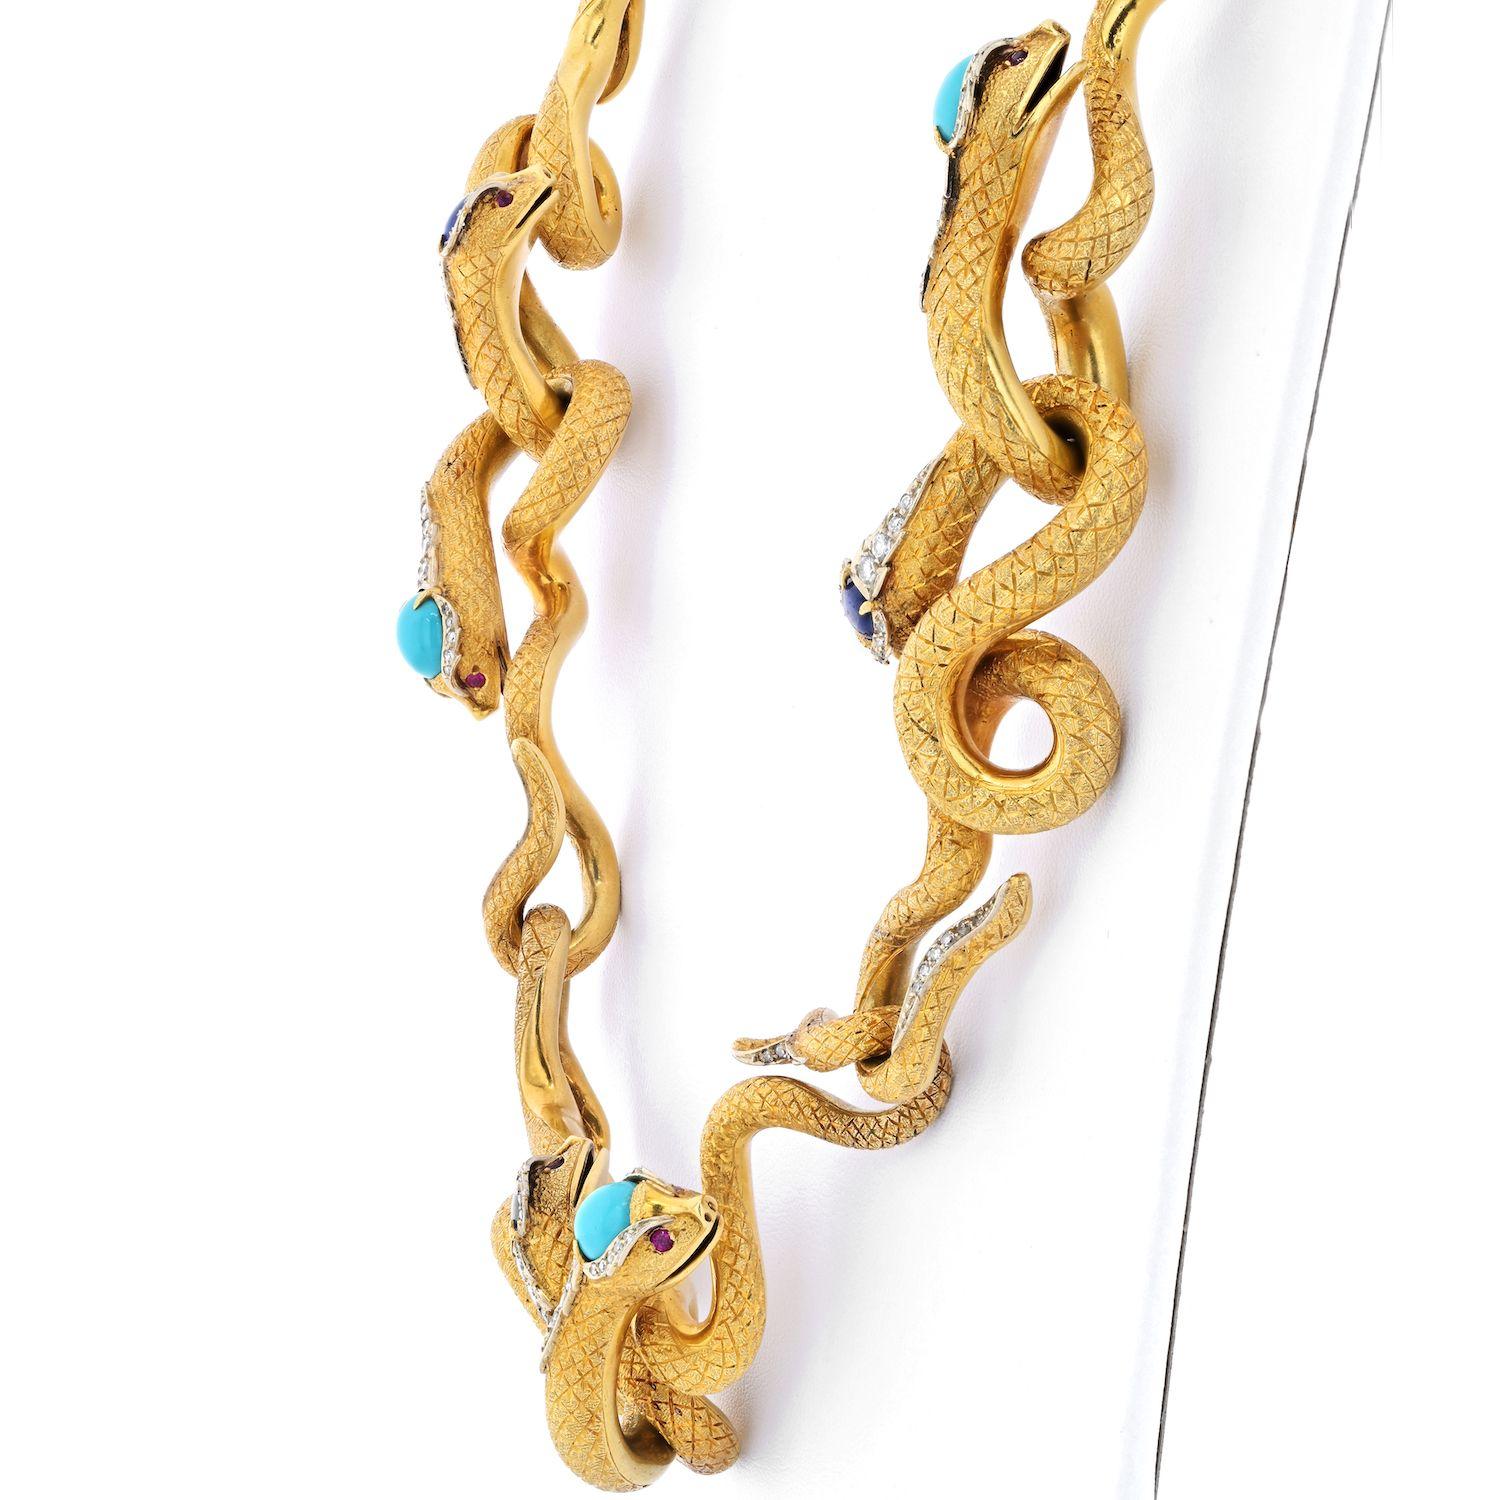 Women's 18K Yellow Gold Articulated Snakes with Turquoise, Lapis and Diamond Necklace